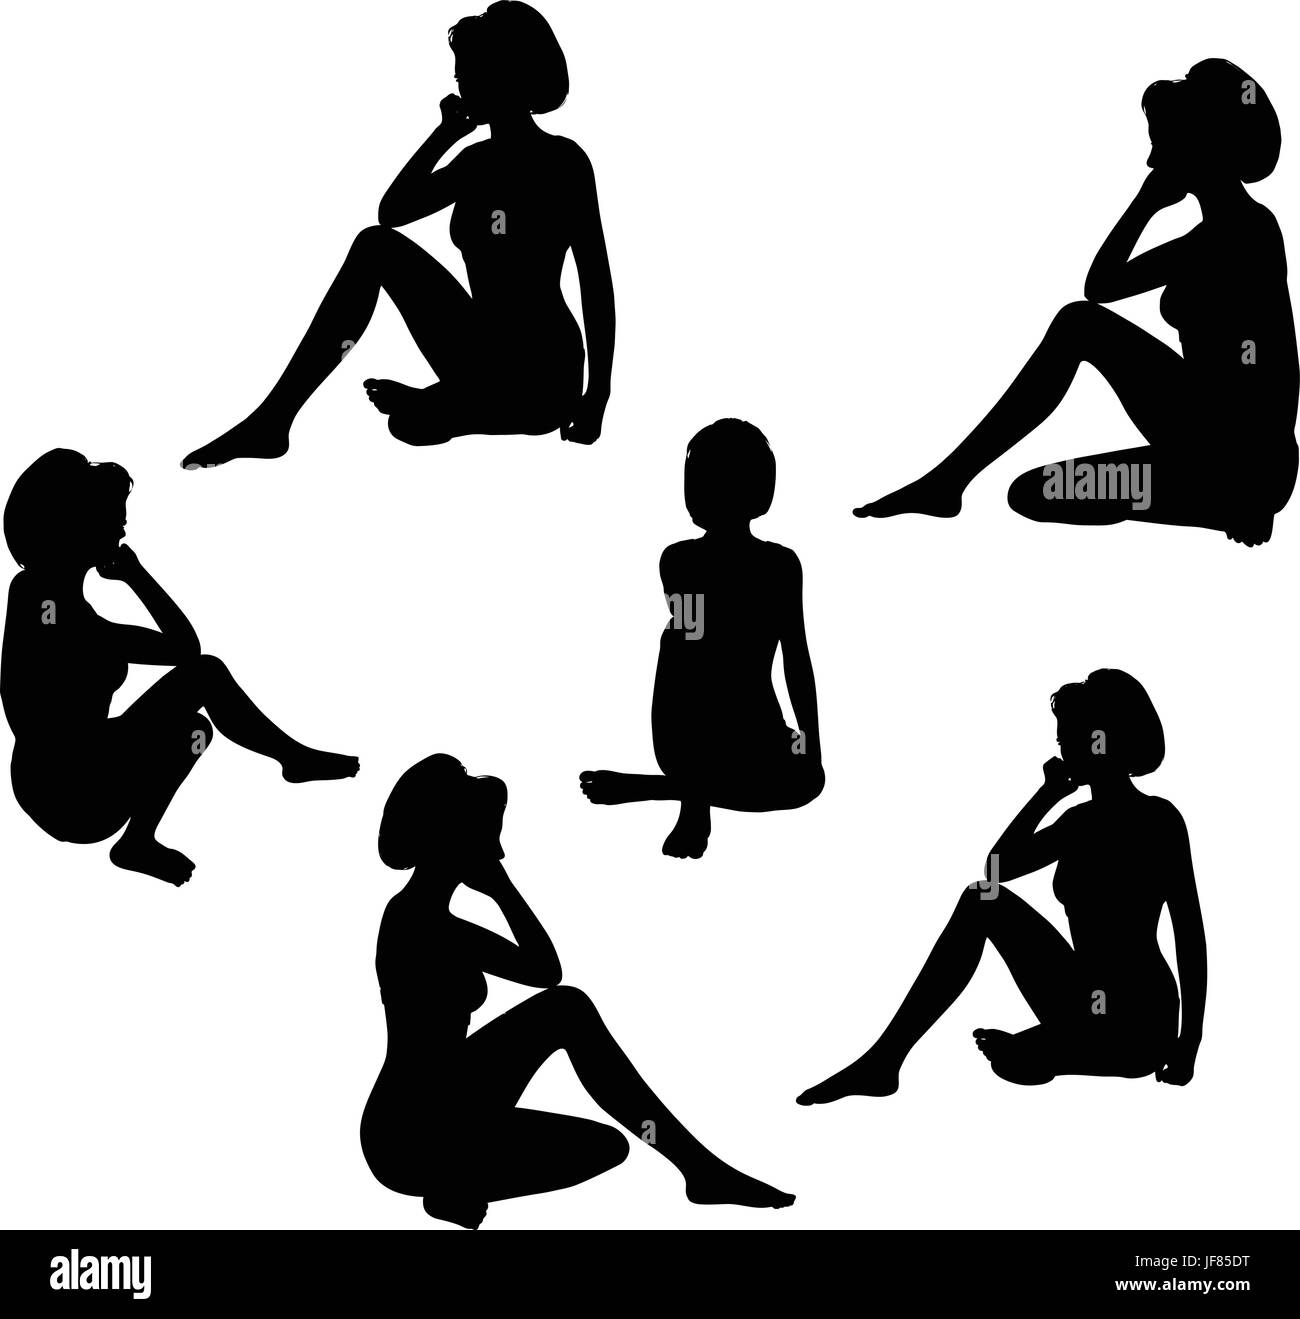 woman silhouette with hand gesture thinking Stock Vector